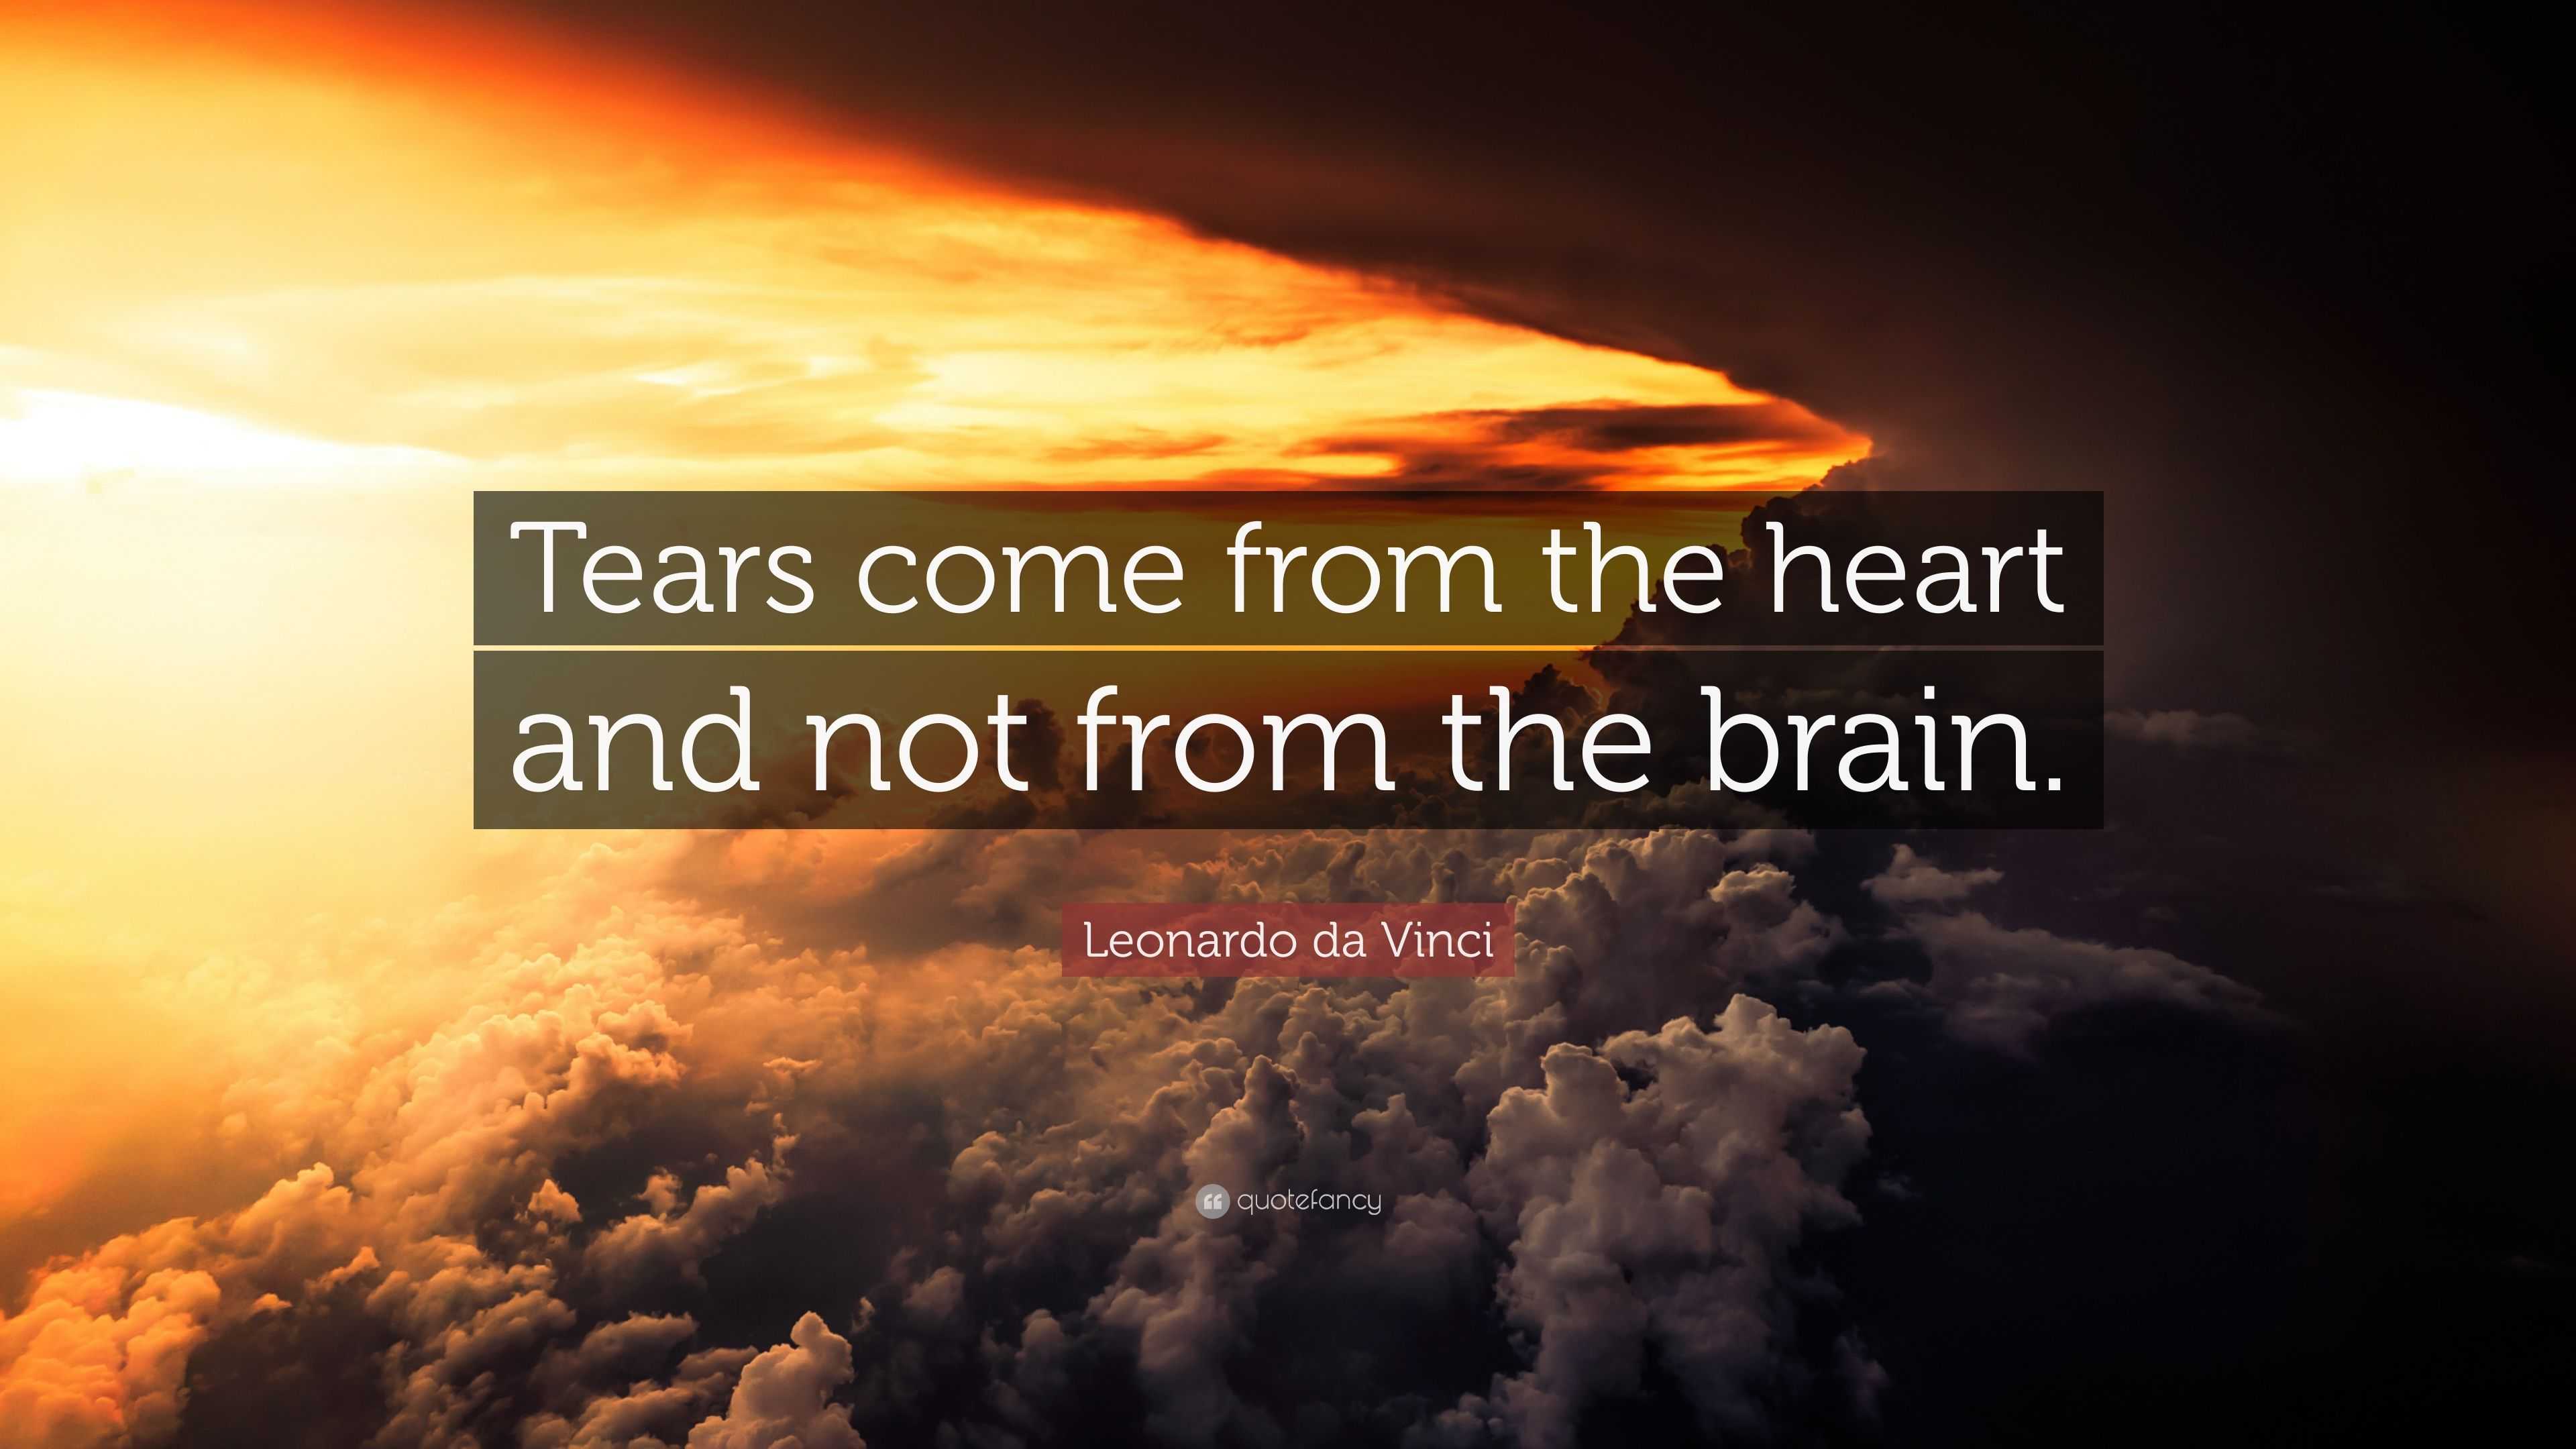 Leonardo da Vinci - Tears come from the heart and not from